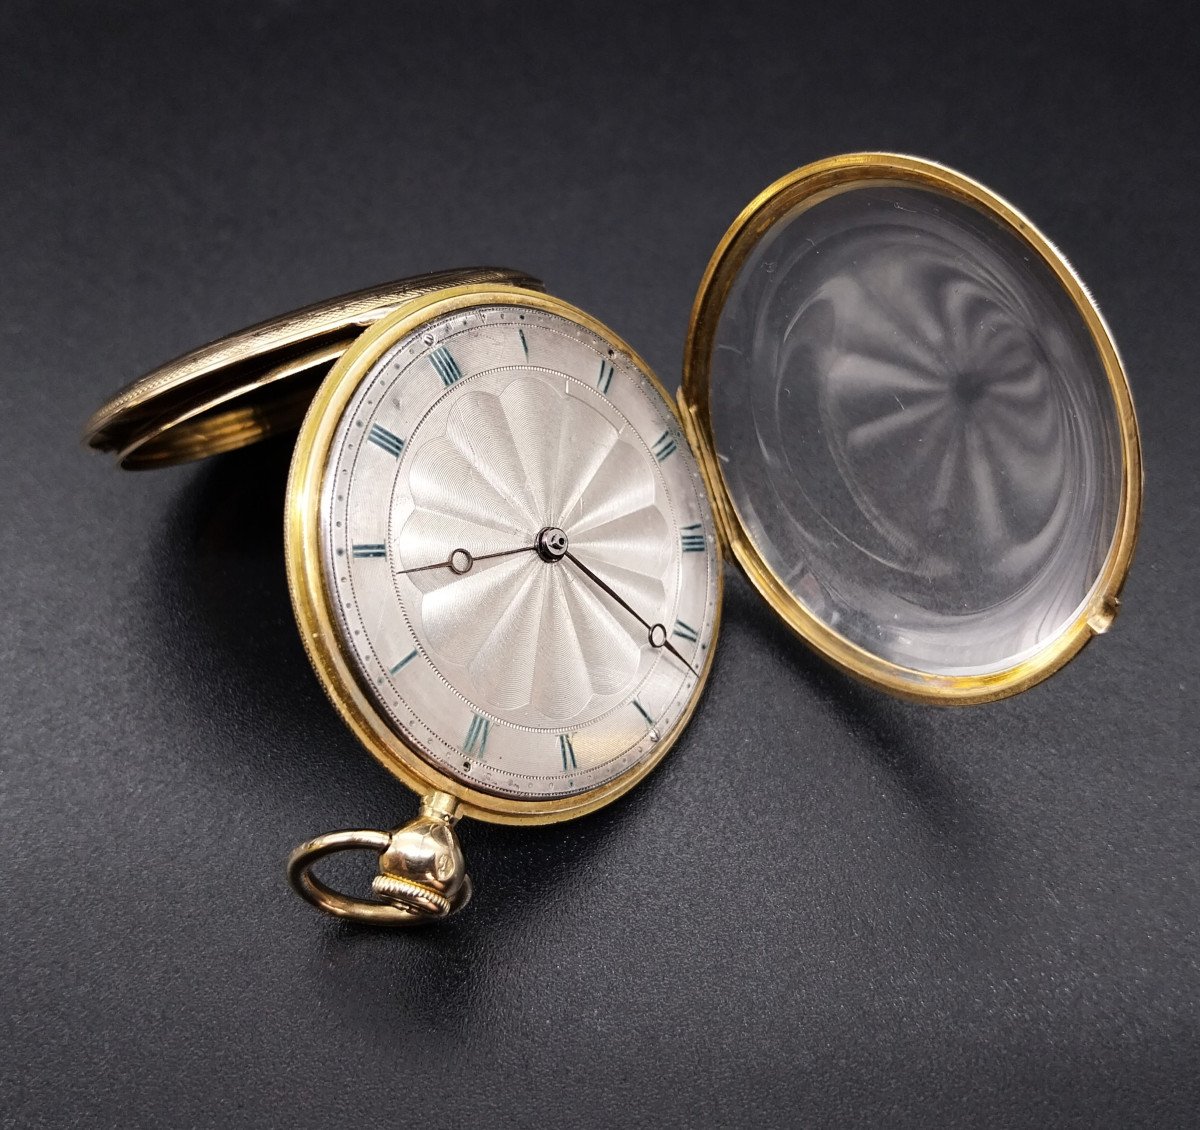 Gold Pocket Watch With Hour And Quarter Repeater, 1825c